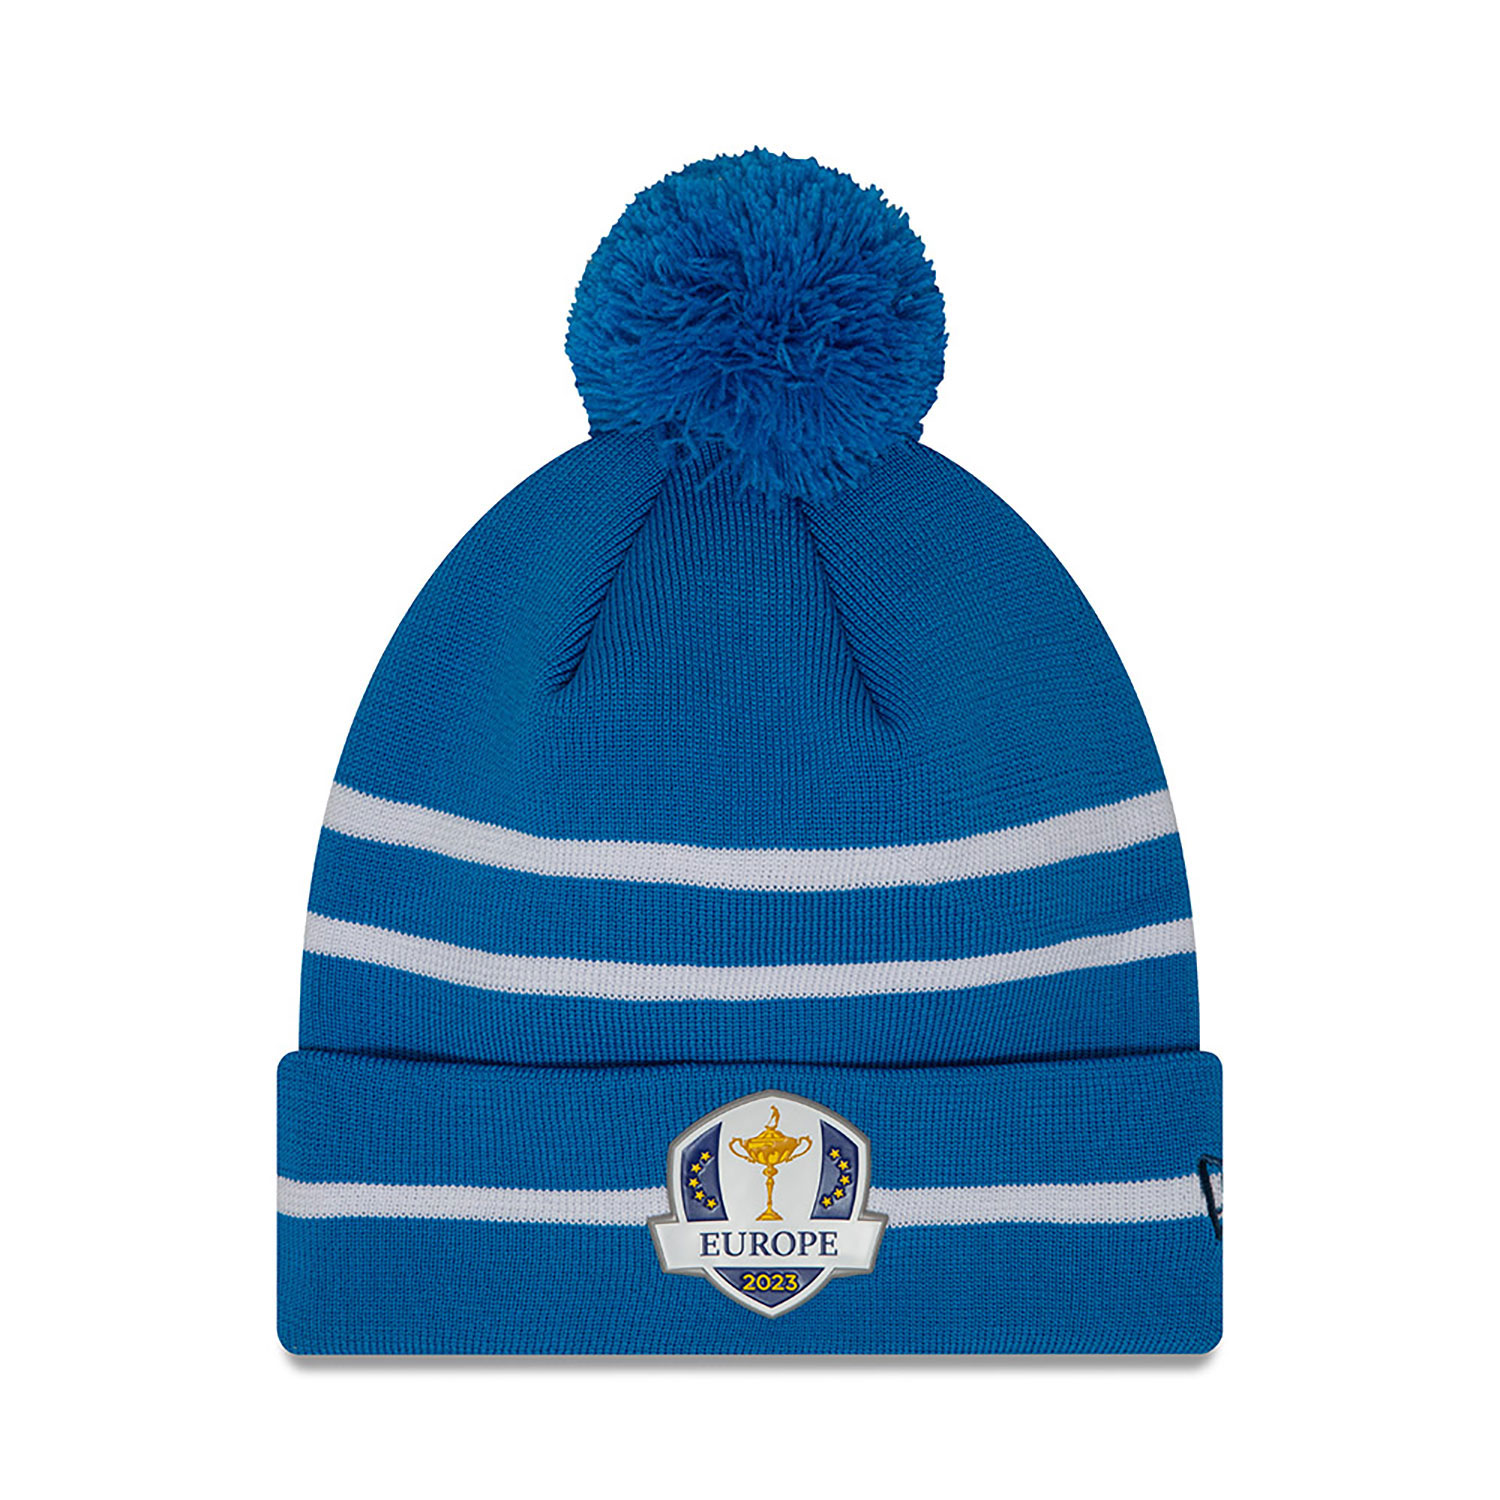 Ryder Cup Europe 2023 Friday Competition Day Blue Bobble Knit Beanie Hat